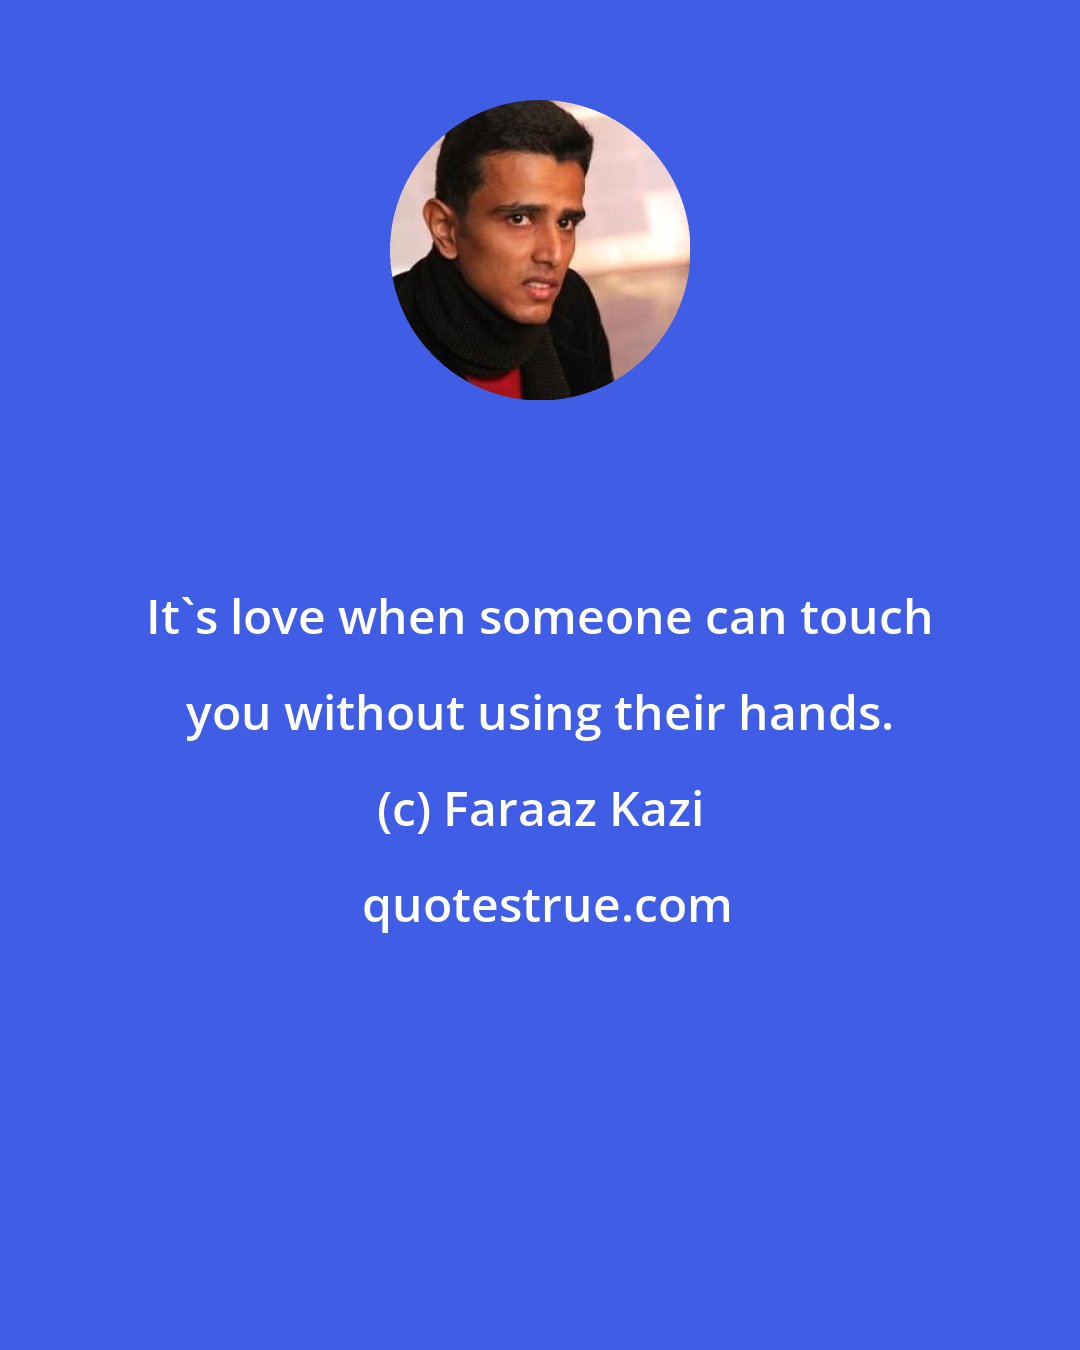 Faraaz Kazi: It's love when someone can touch you without using their hands.